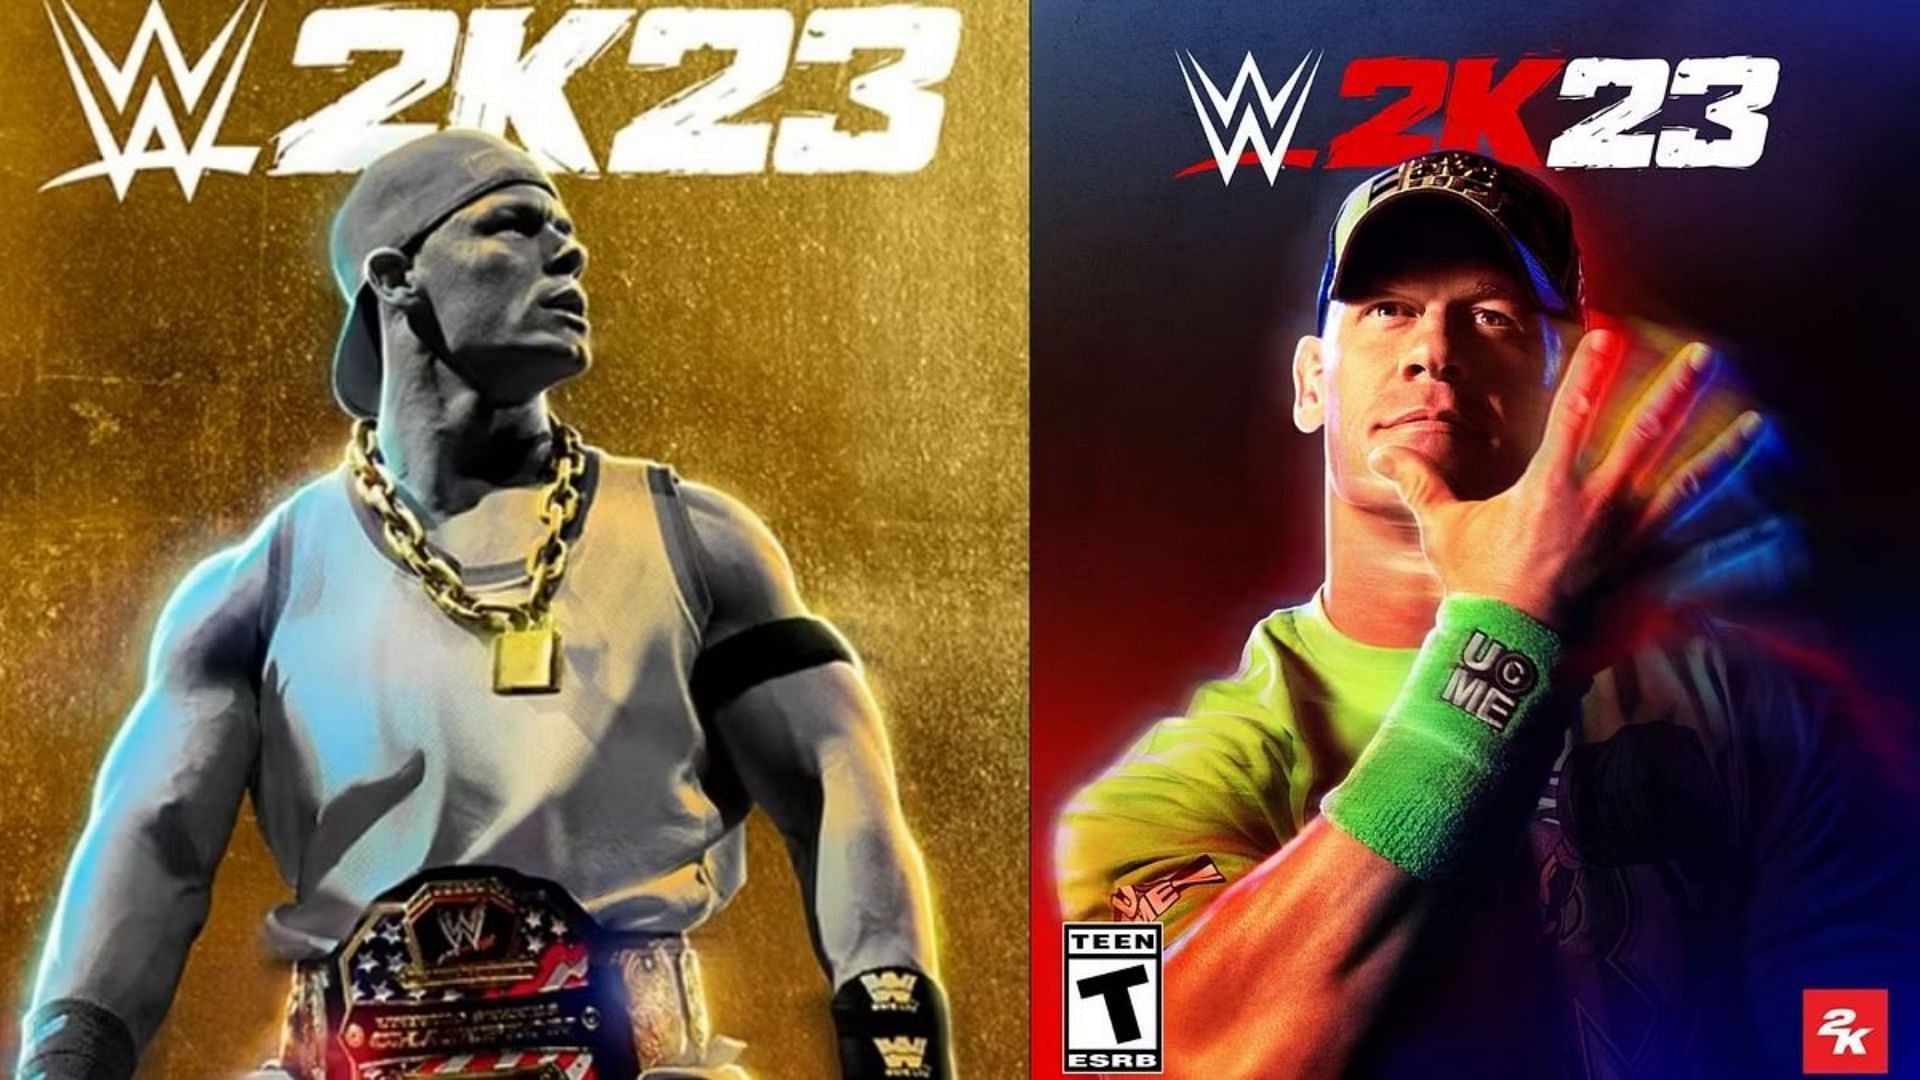 16-time world champion John Cena on the cover of WWE 2K23